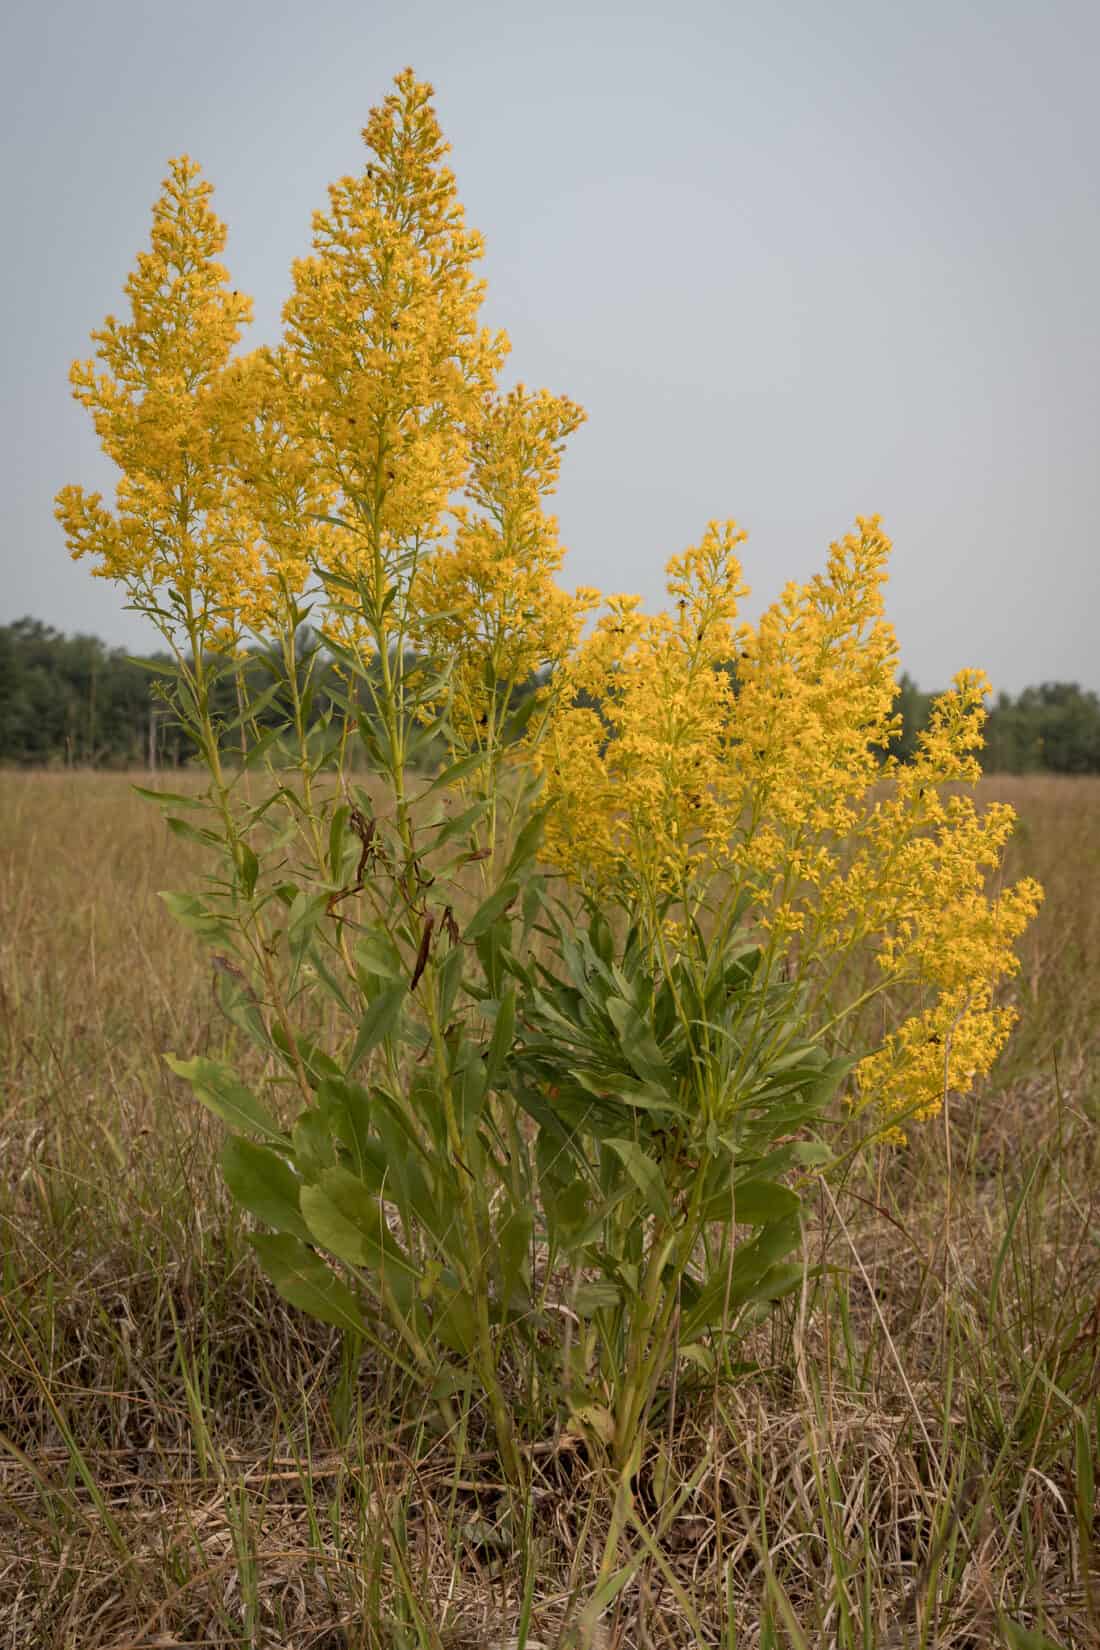 Goldenrod plants in bloom in a field.Showy Goldenrod (Solidago speciosa)